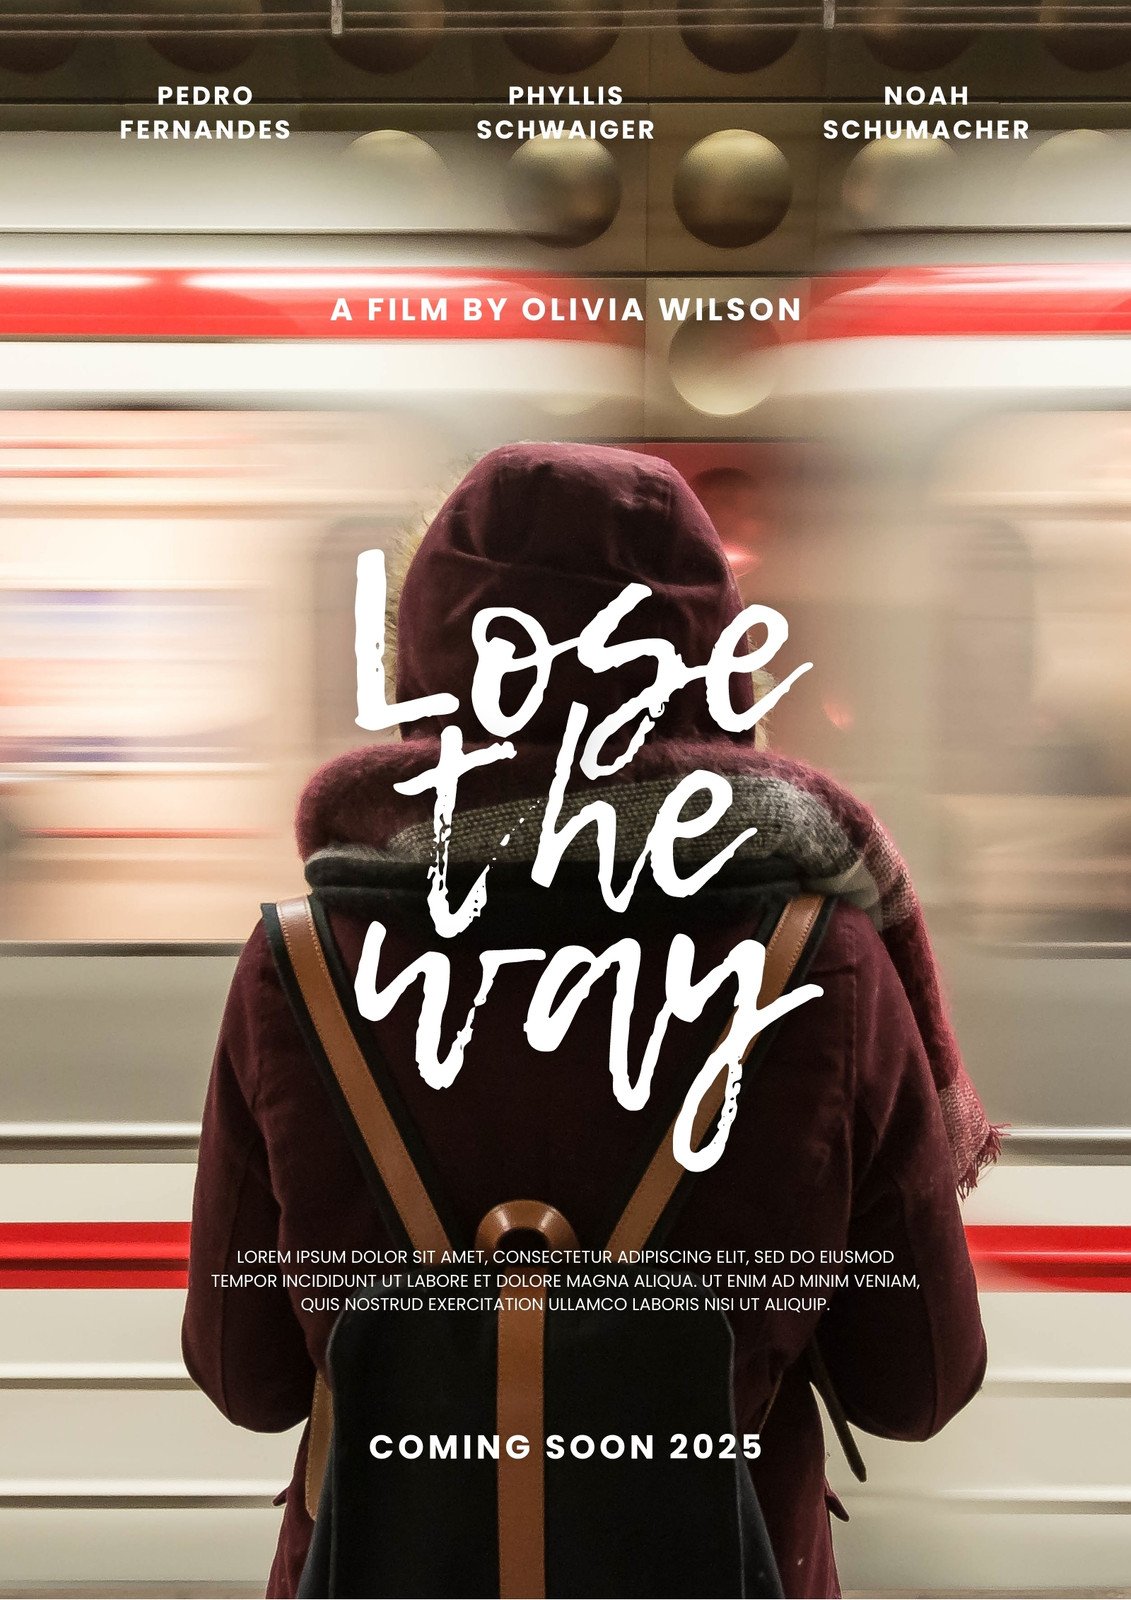 Brown and White Minimalist Photo Lose the way Movie Poster